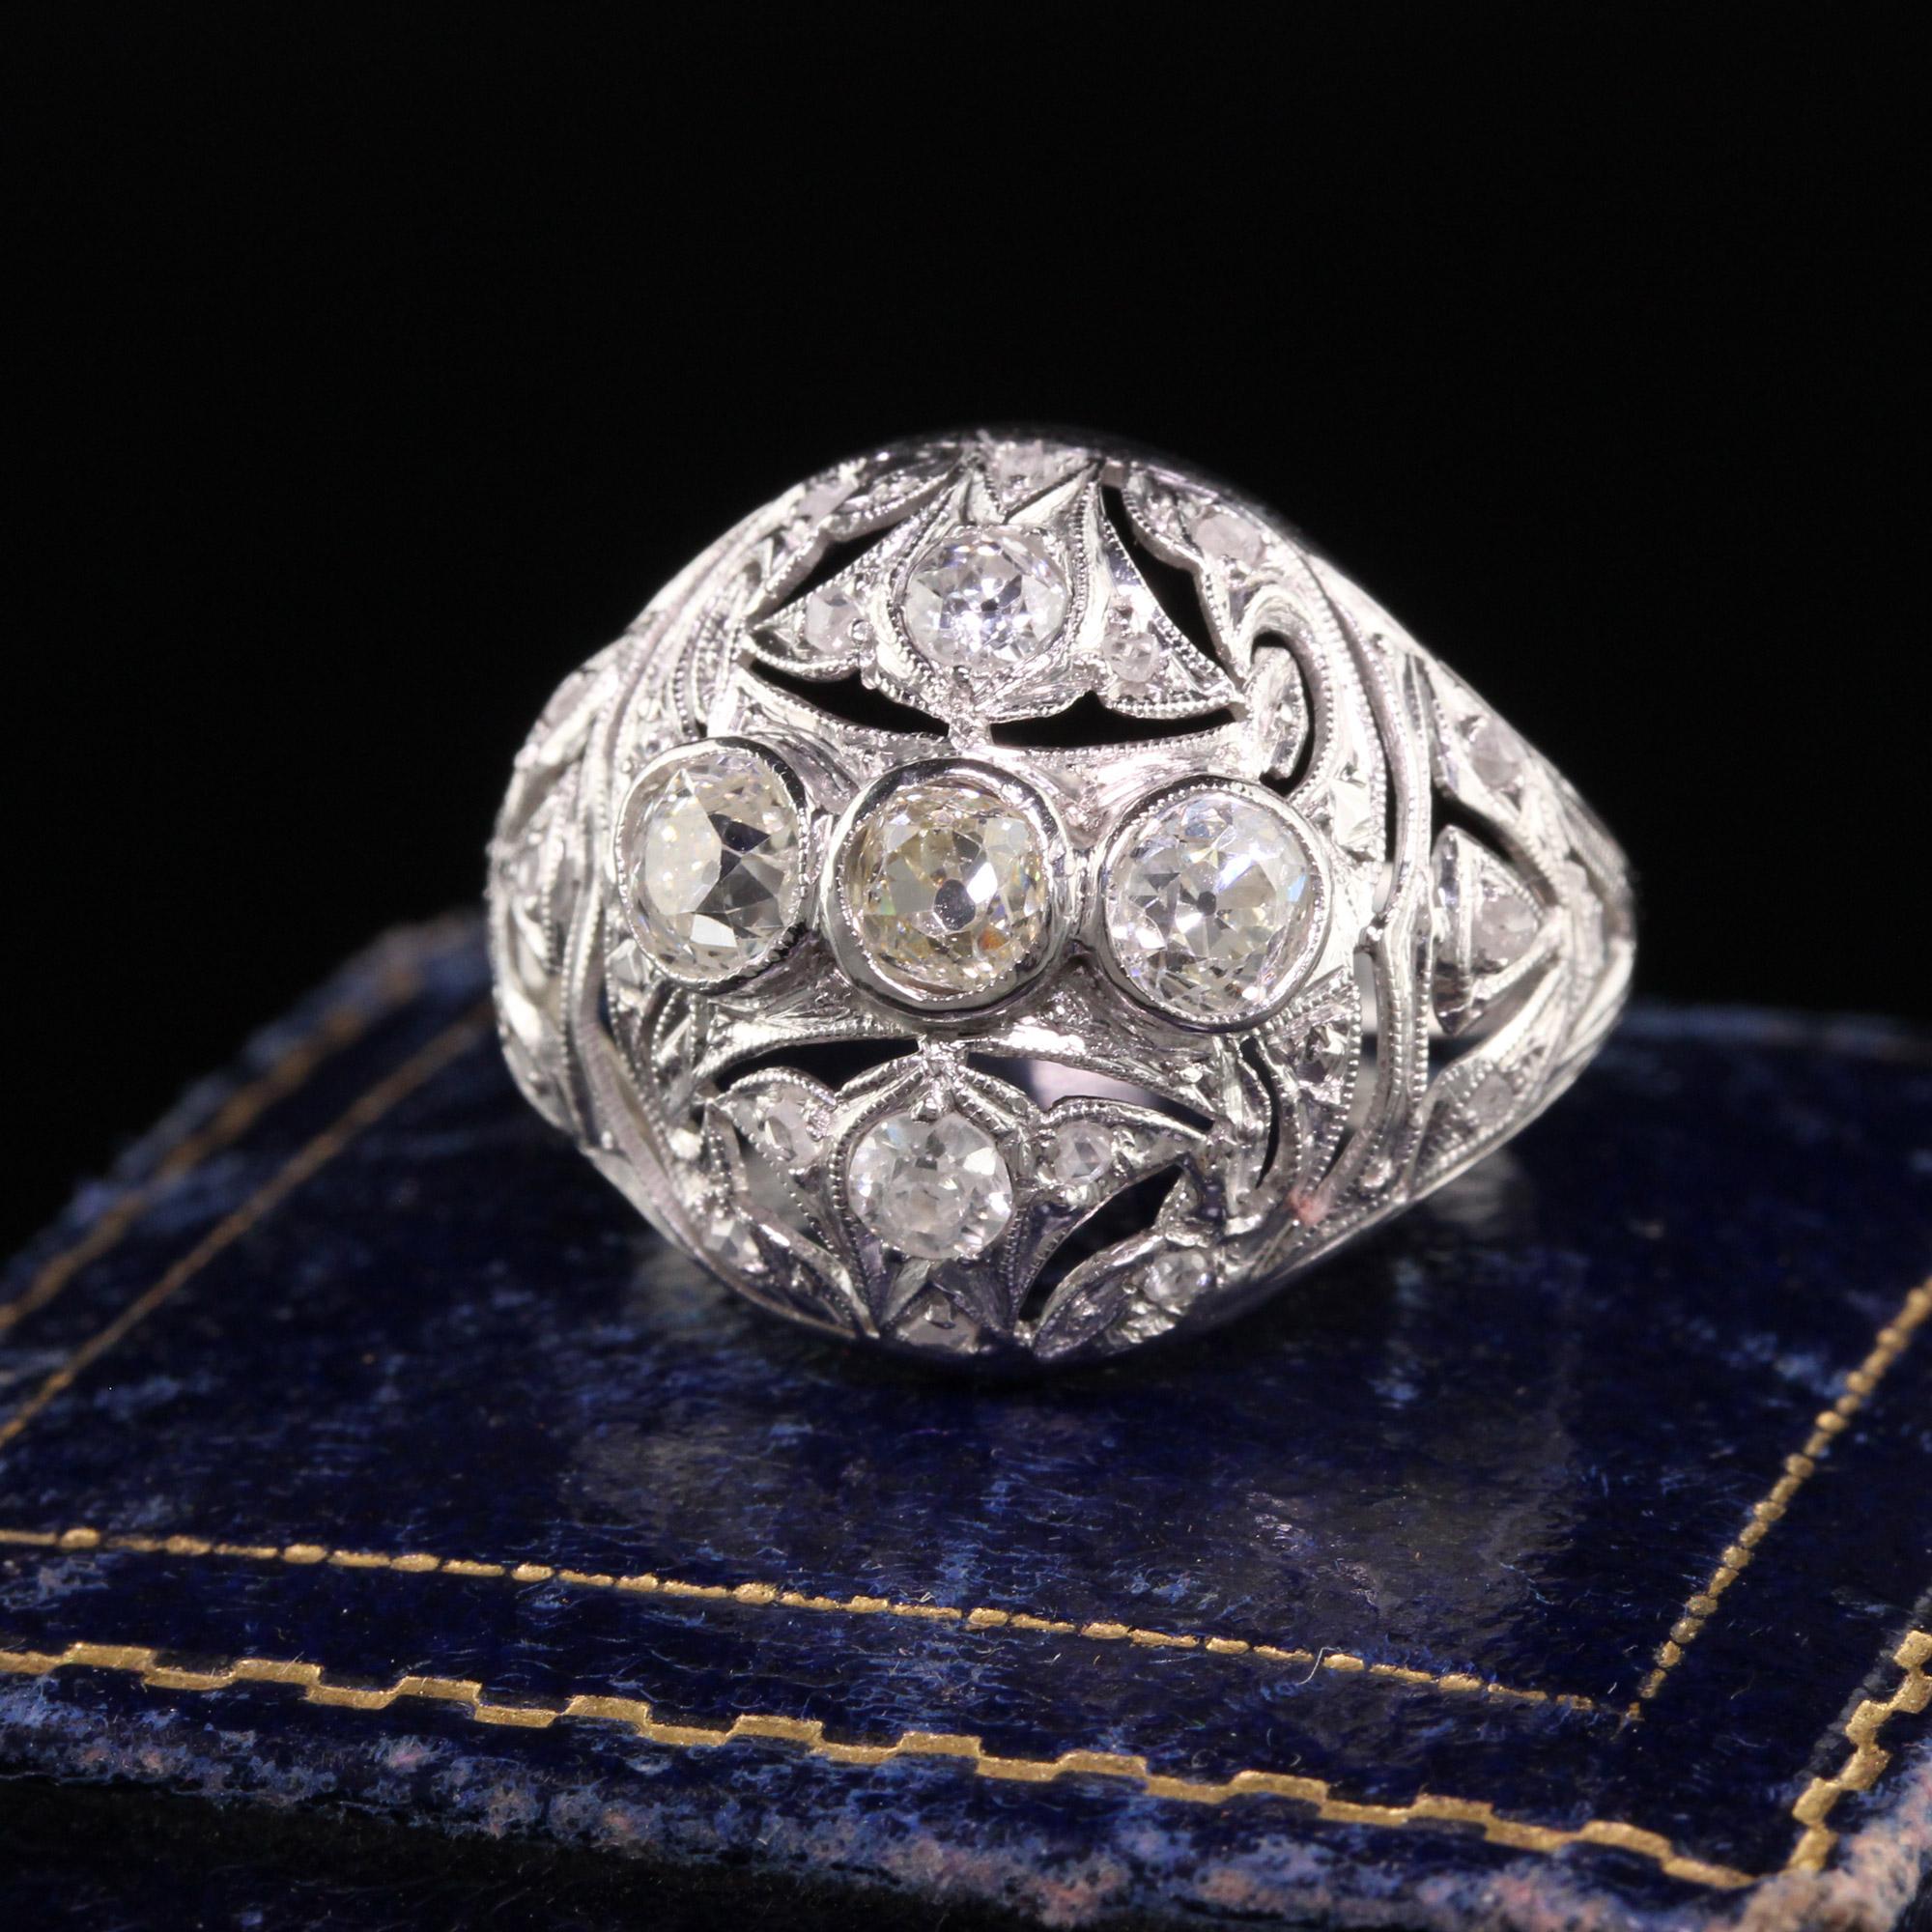 Beautiful Antique Art Deco Platinum Old Mine Diamond Filigree Cocktail Ring. This beautiful ring is crafted in platinum. The ring holds old mine, old european, and rose cut diamonds on it. There is a beautiful floral pattern and in good